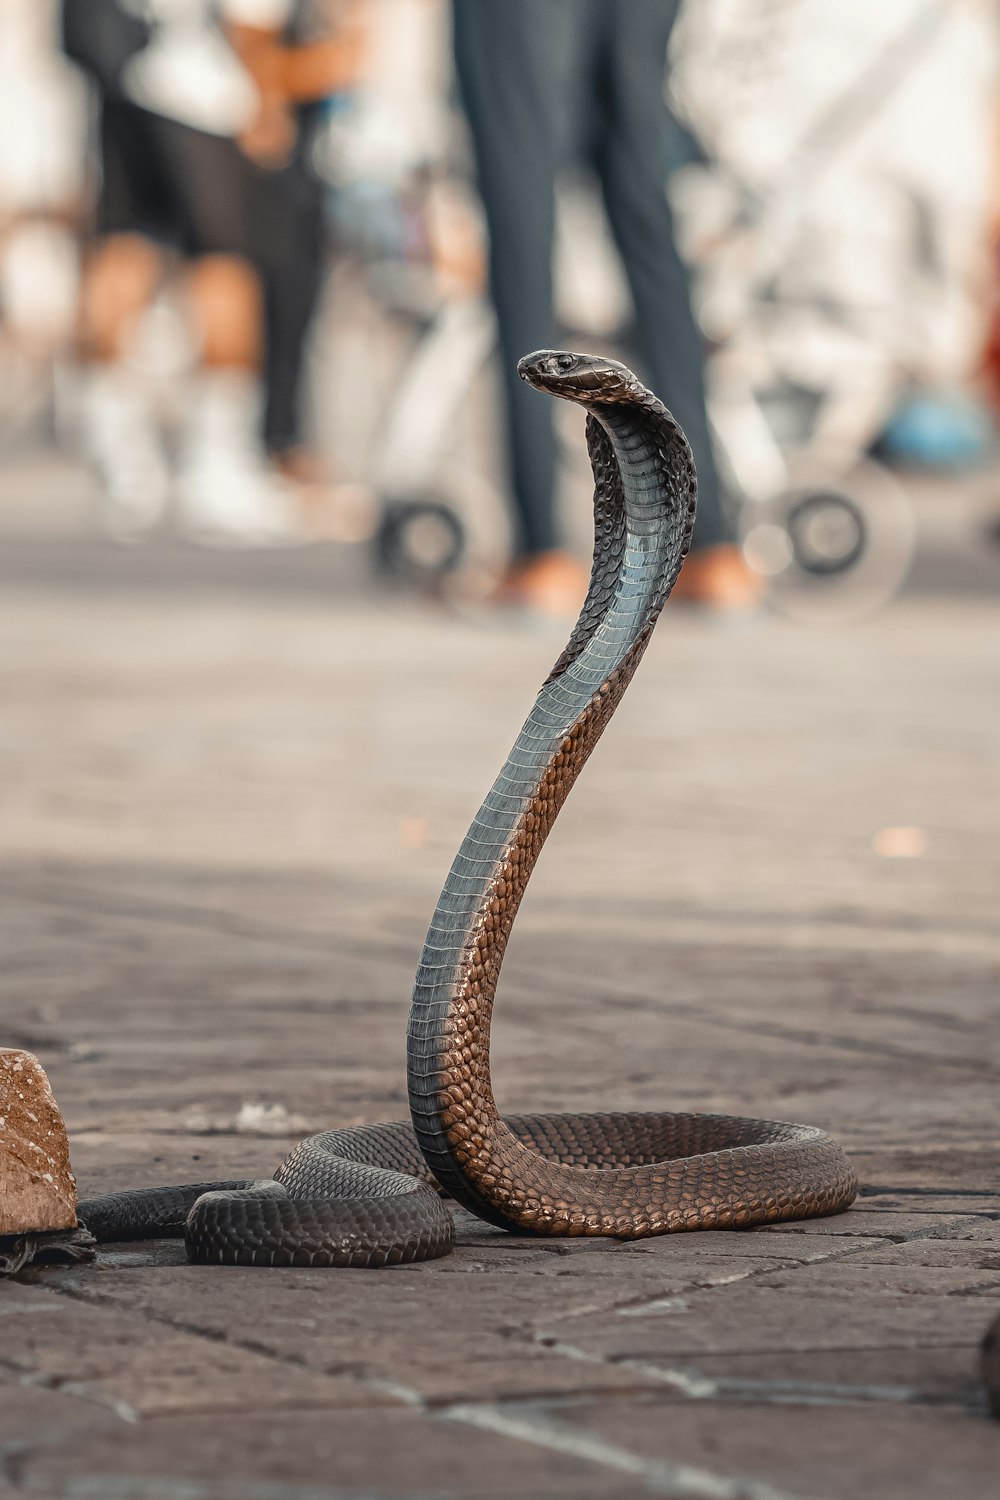 a snake on the ground with a person in the background